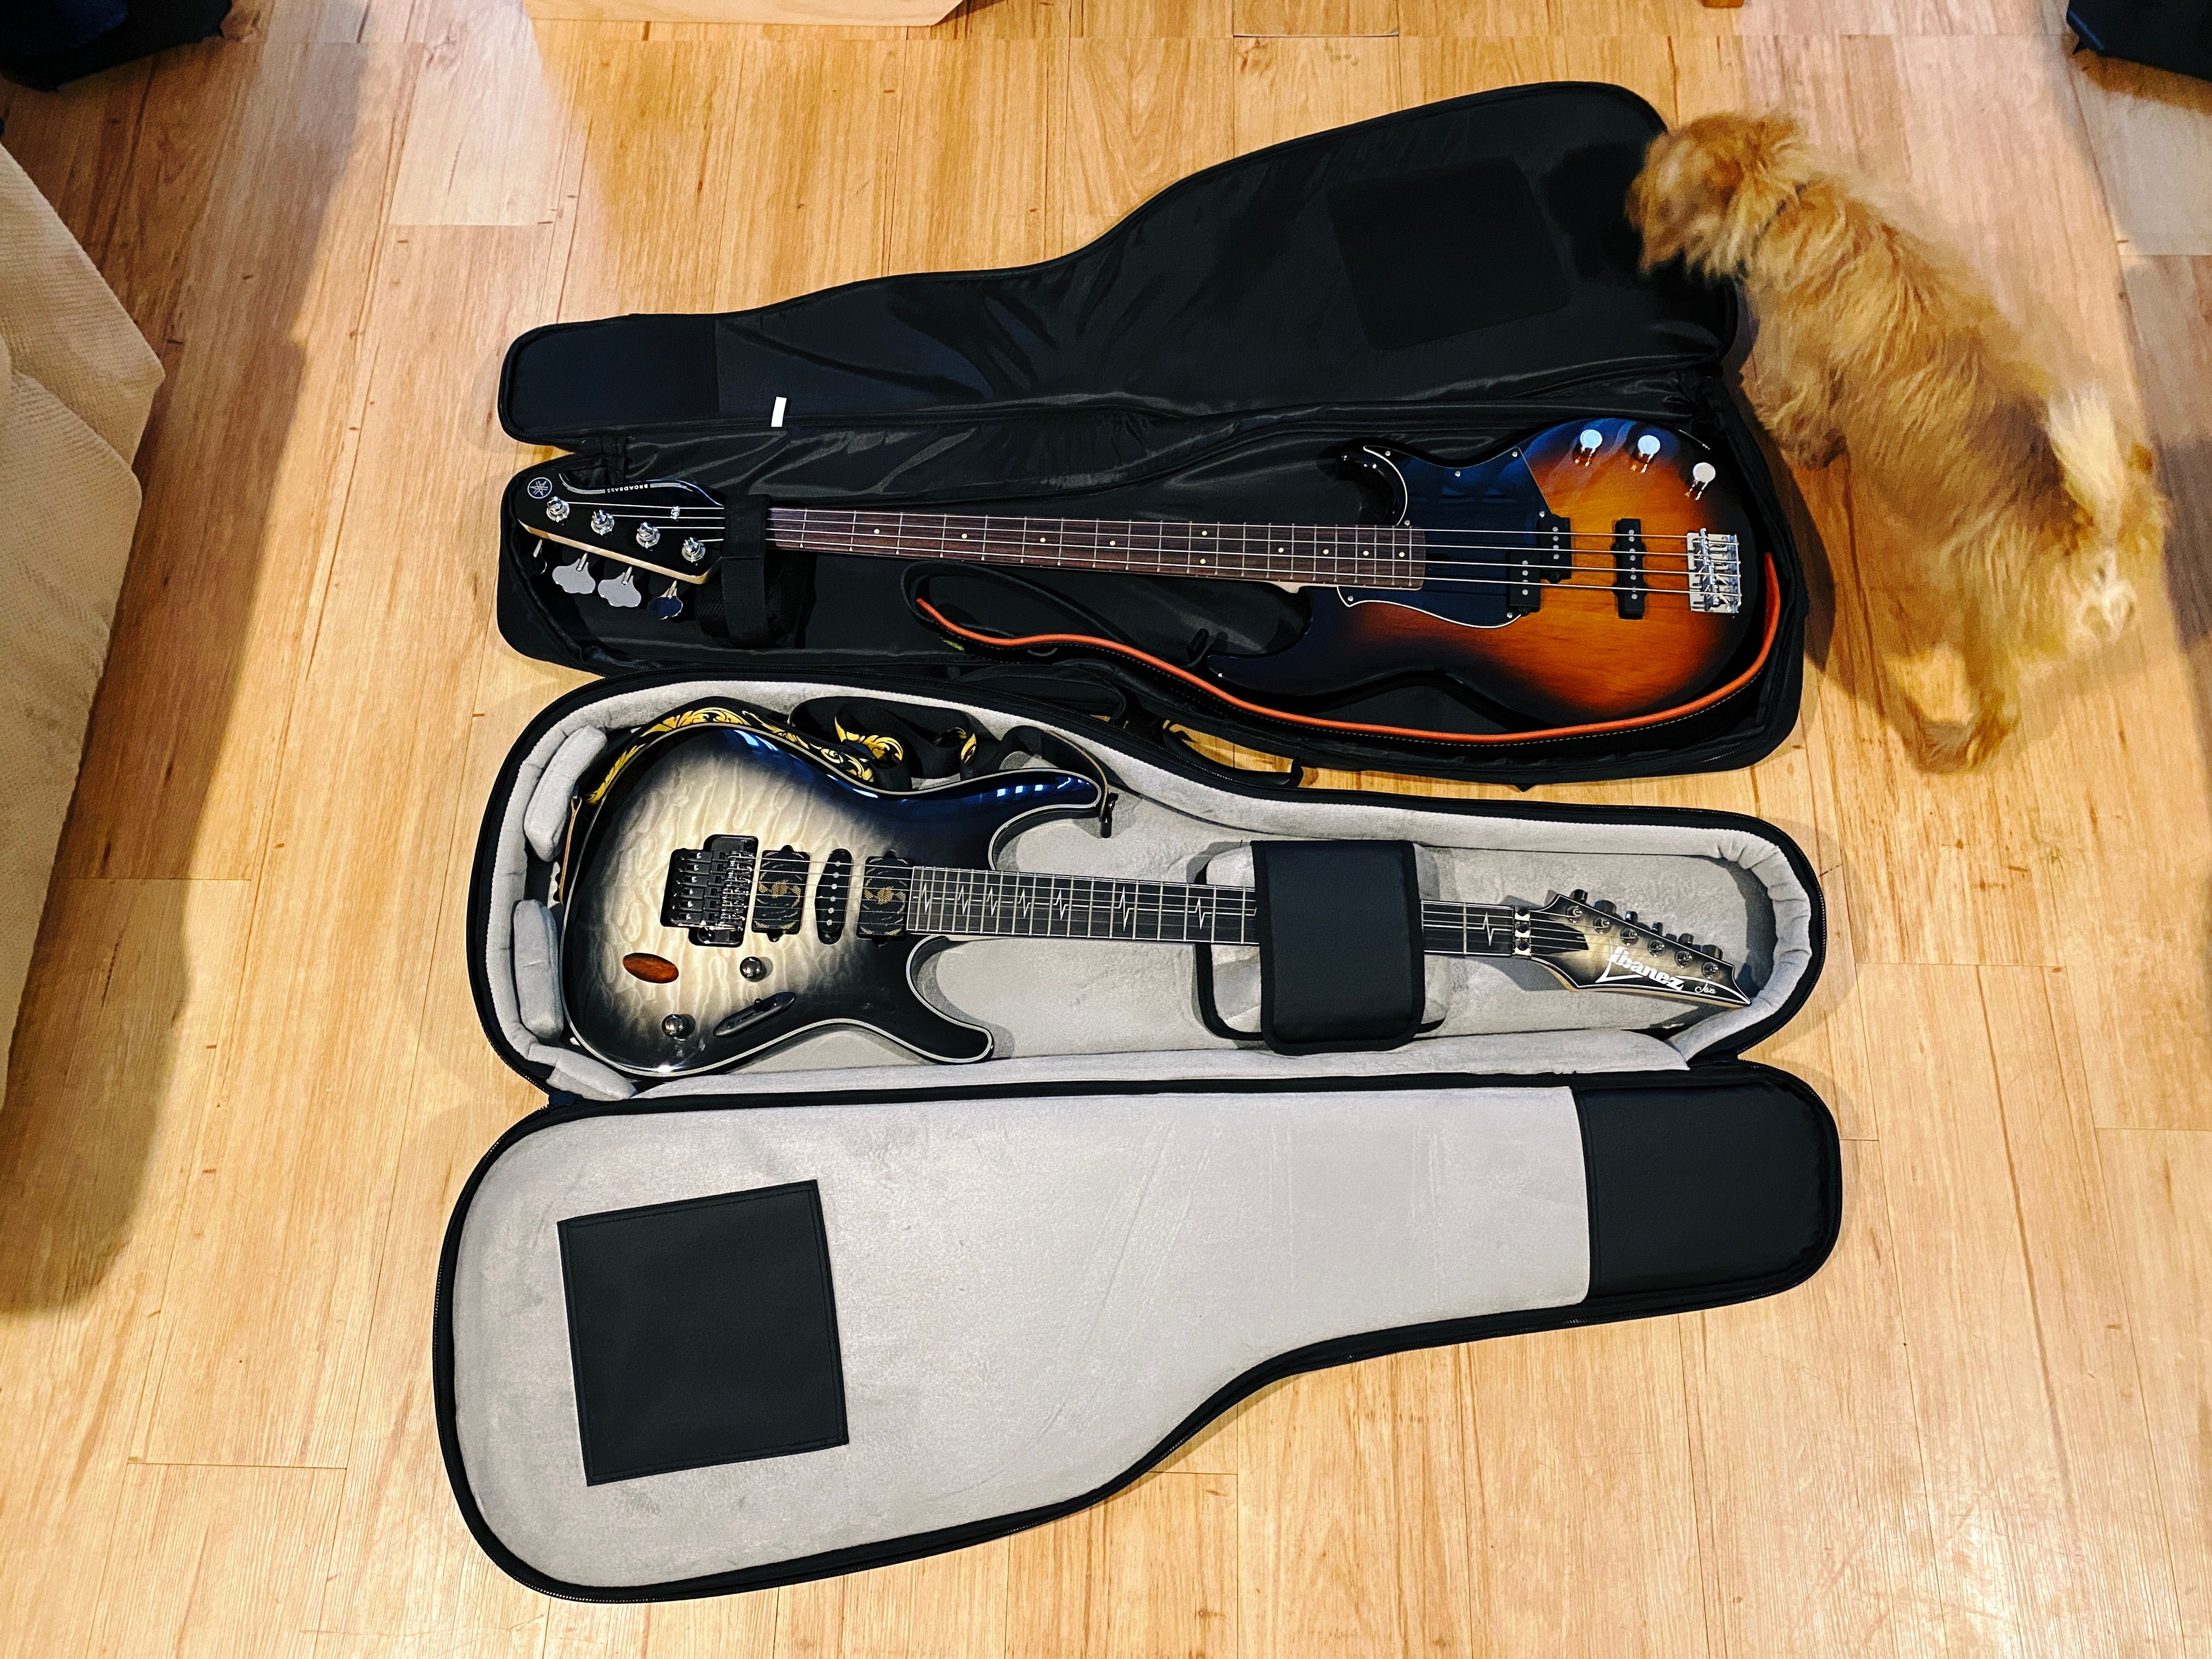 A photo of an electric guitar and an electric bass guitar sitting in gig bags open on the floor. A small scruffy blonde dog is giving them a good sniff.